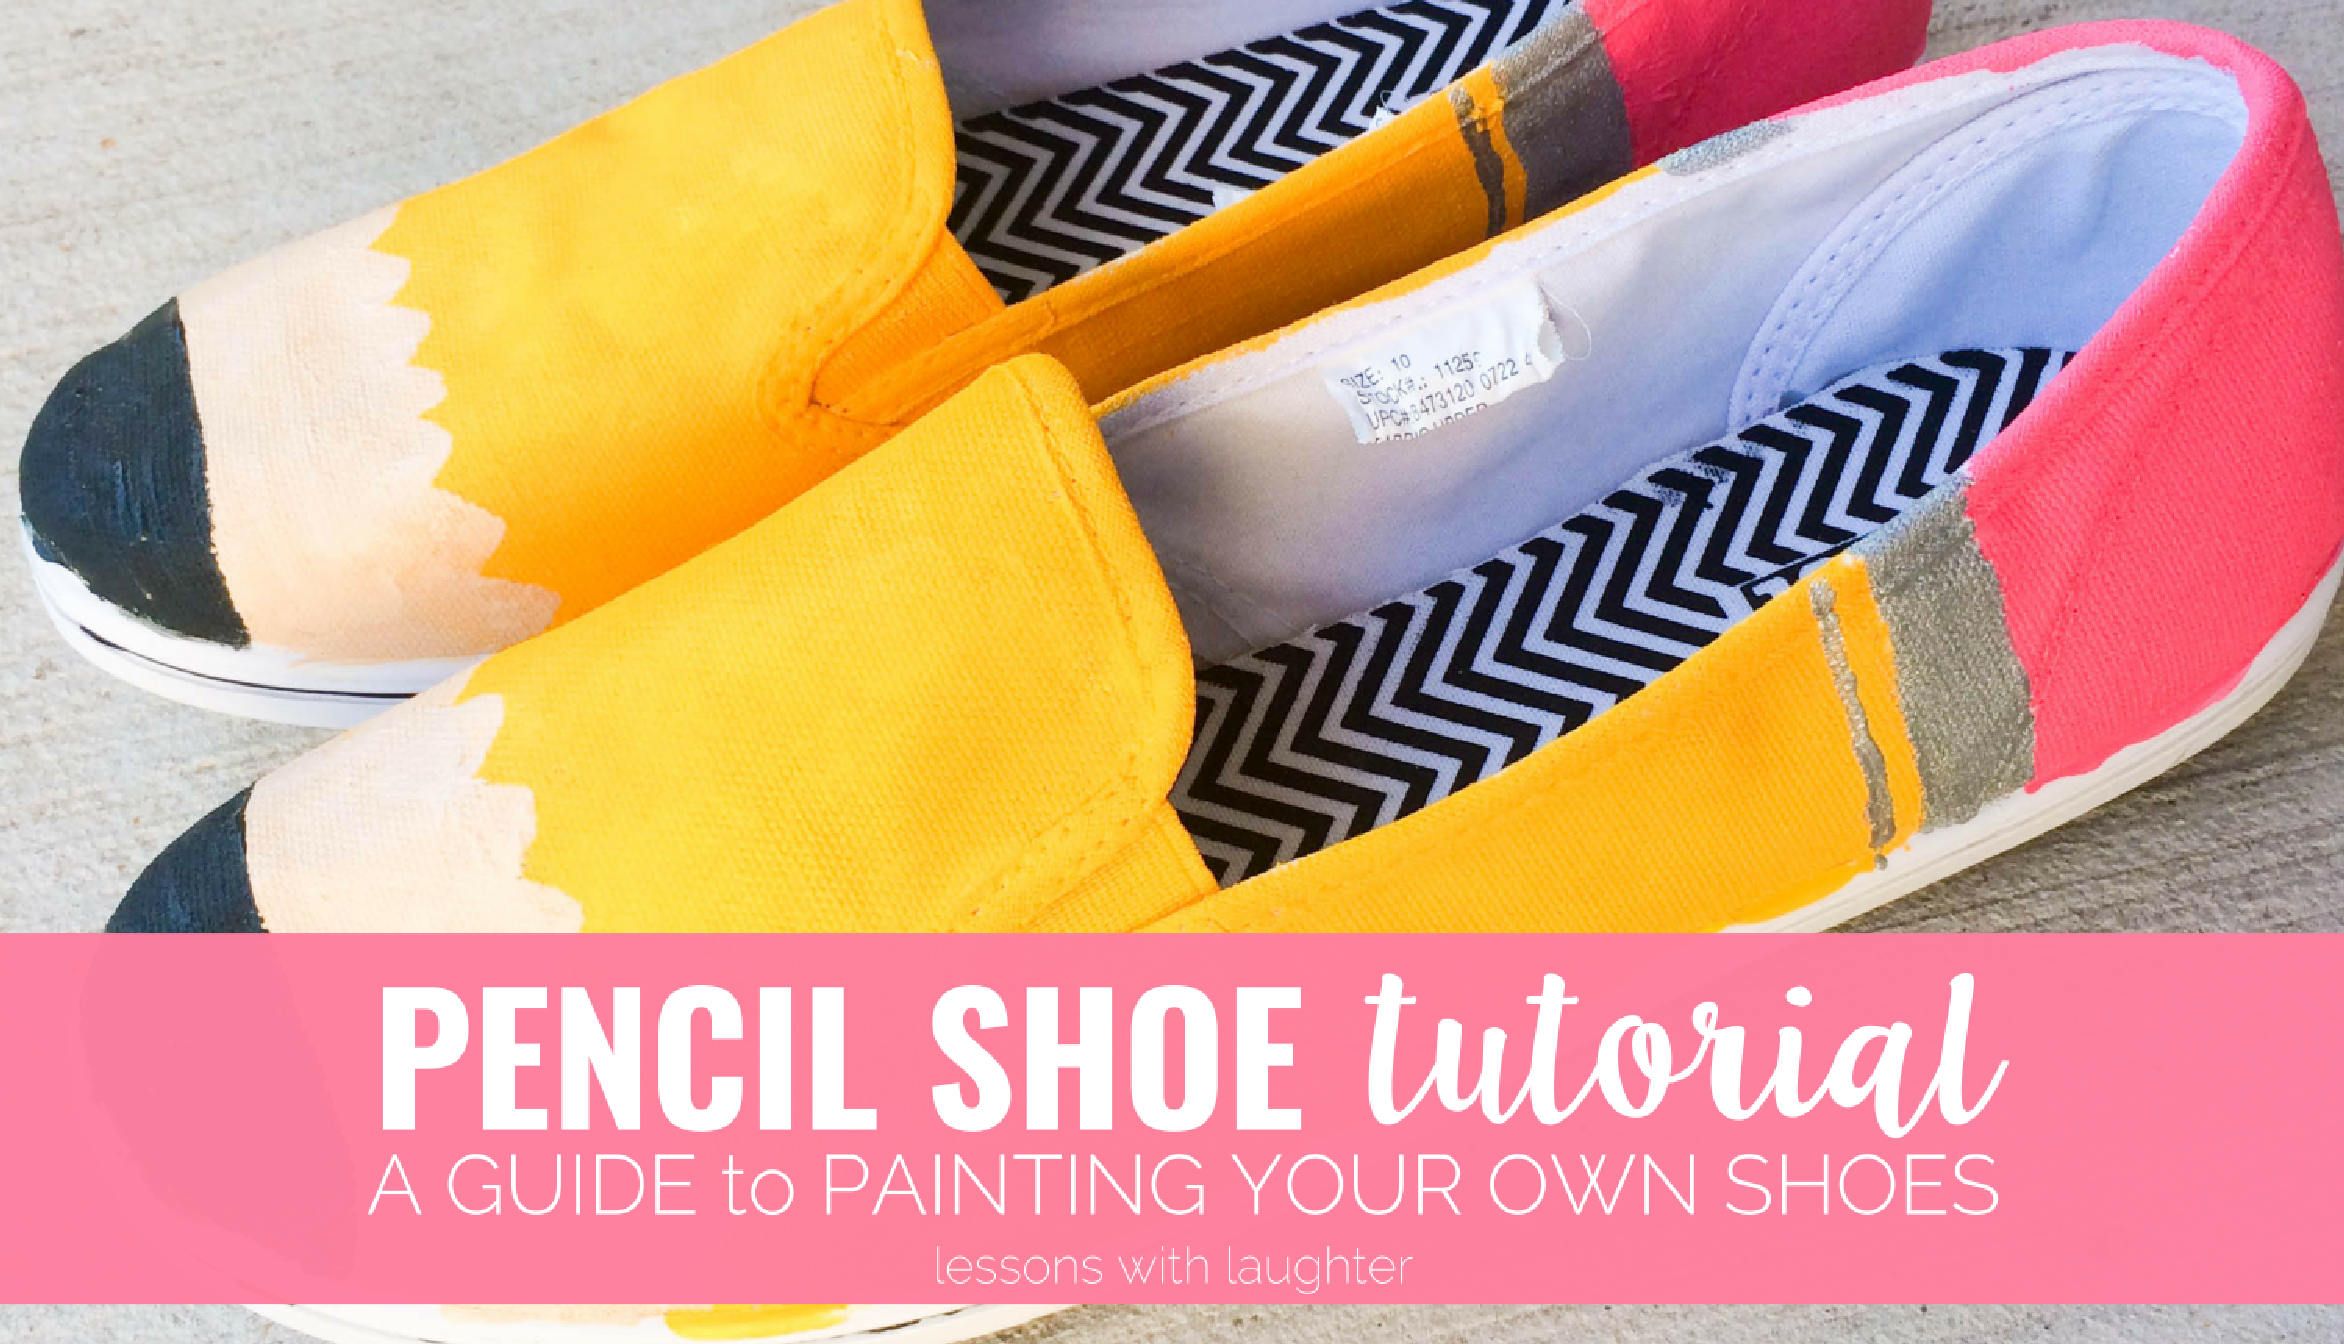 Pencil shoe tutorial for teachers who want to make fun pencil shoes for school!